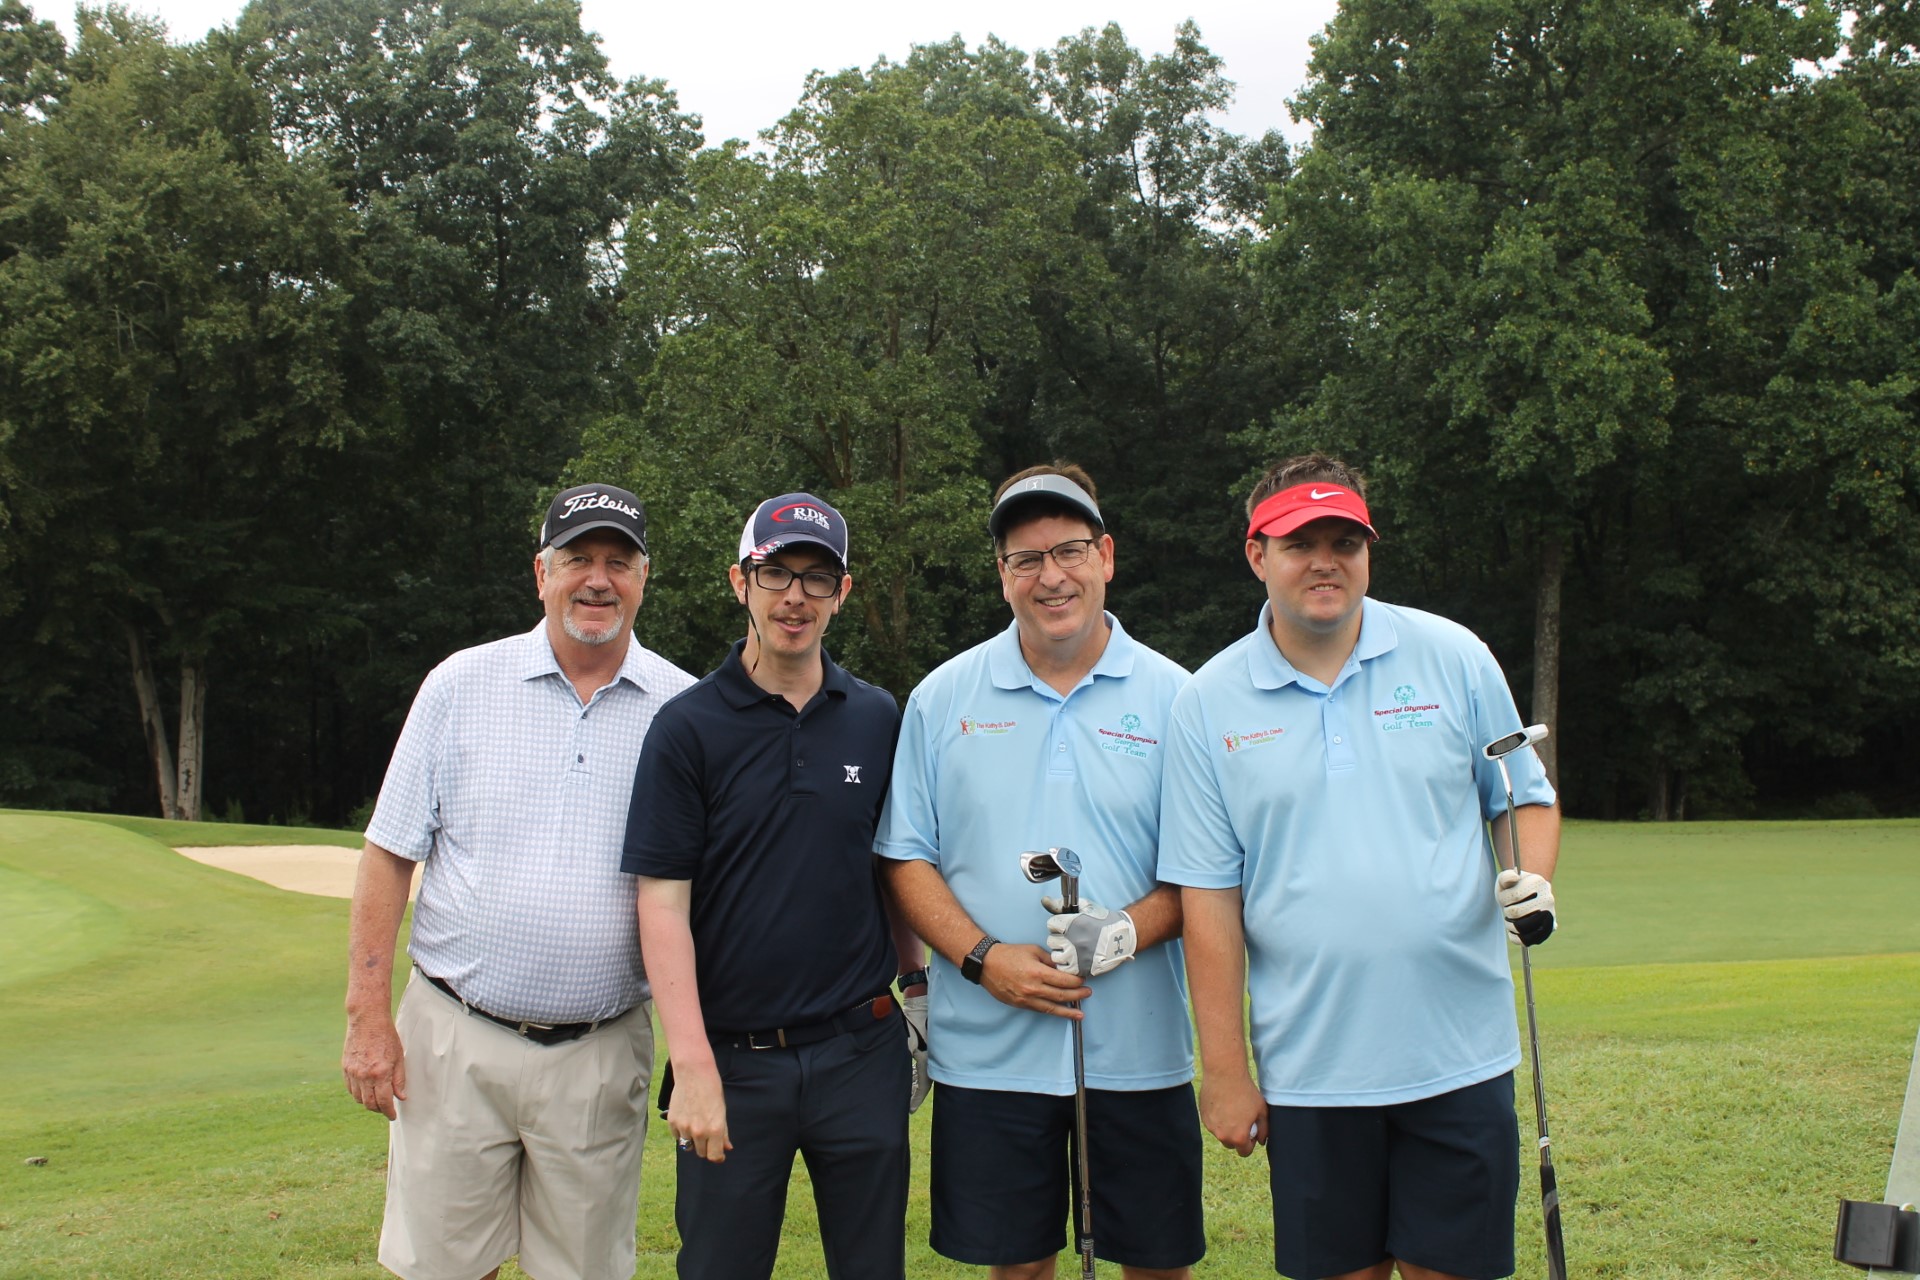 A photograph of four men standing on the golf green and smiling at the camera.